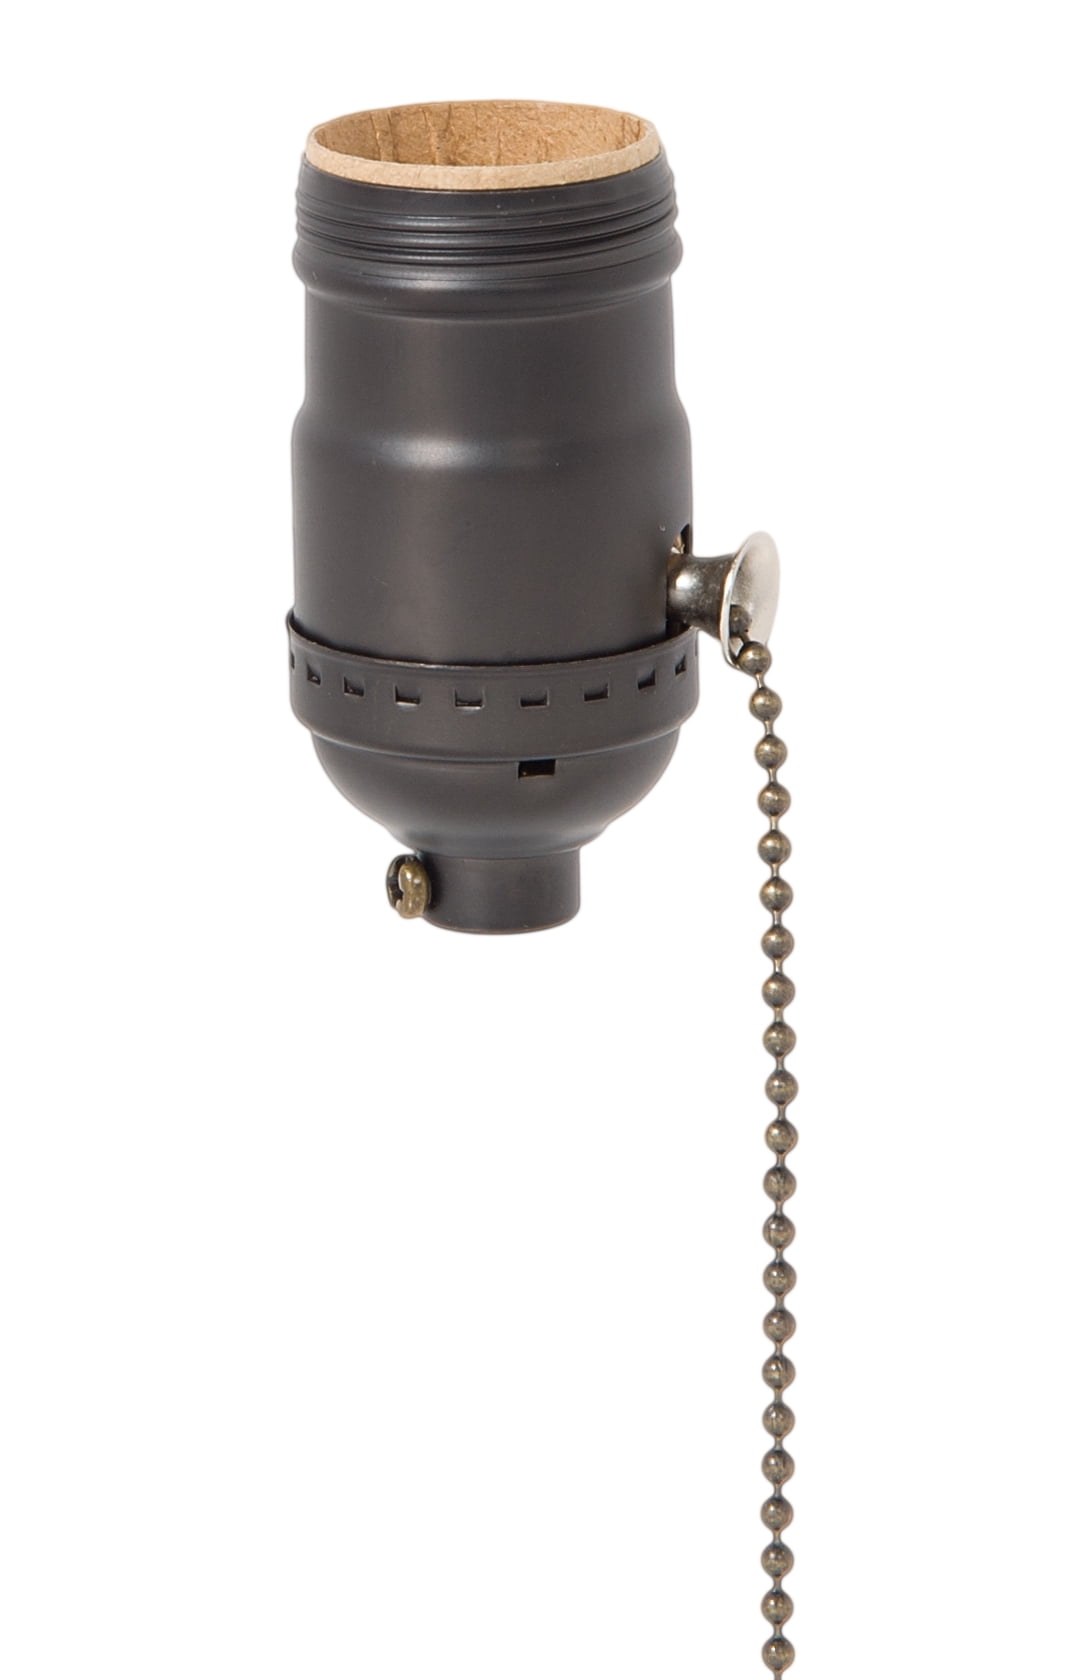 Polished & Lacquered Brass Pull Chain Early Electric Style Lamp Socket, Pull Chain, On/Off Function, Uno Thread